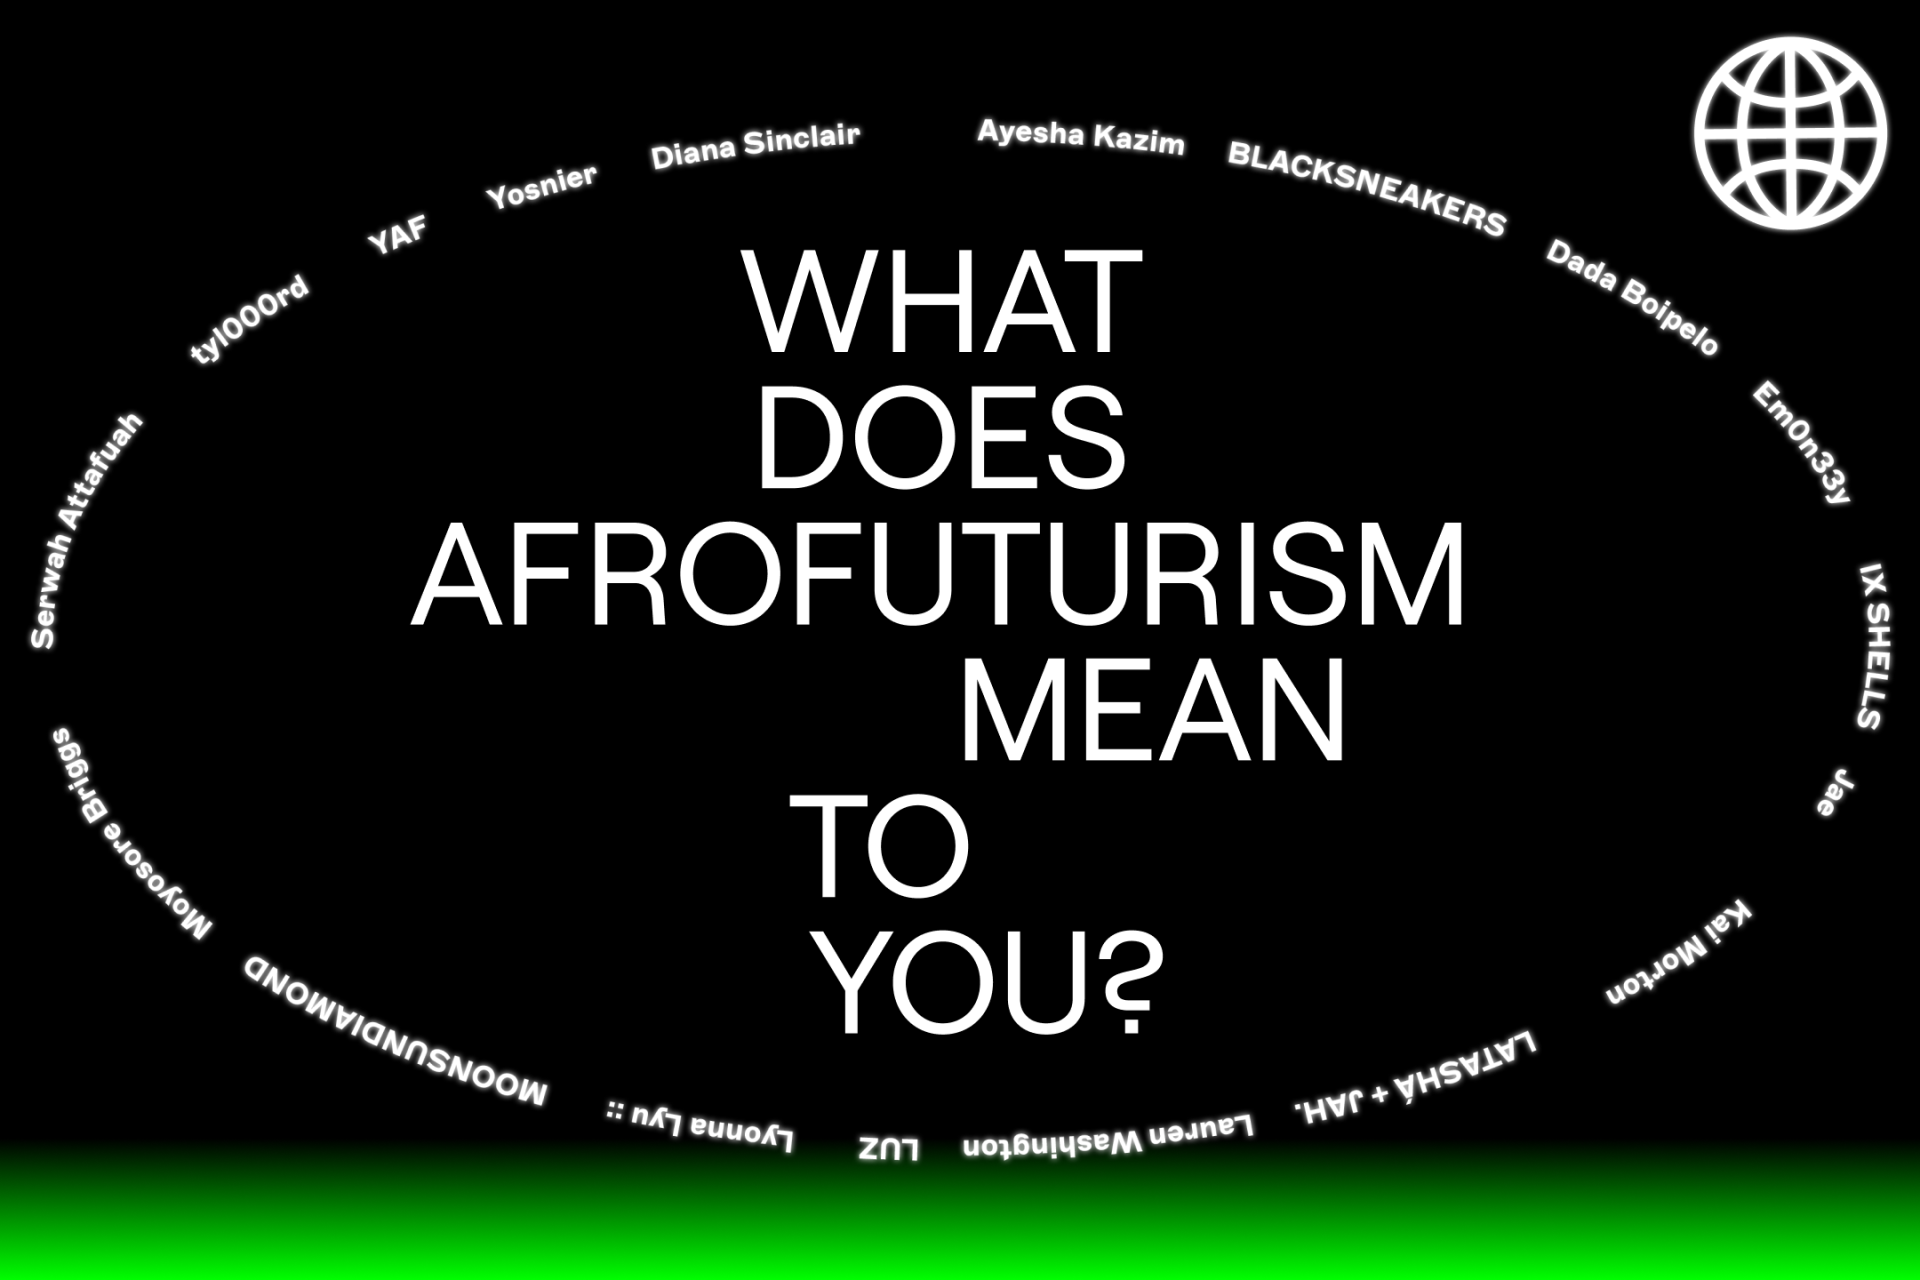 What does Afrofuturism mean to you?